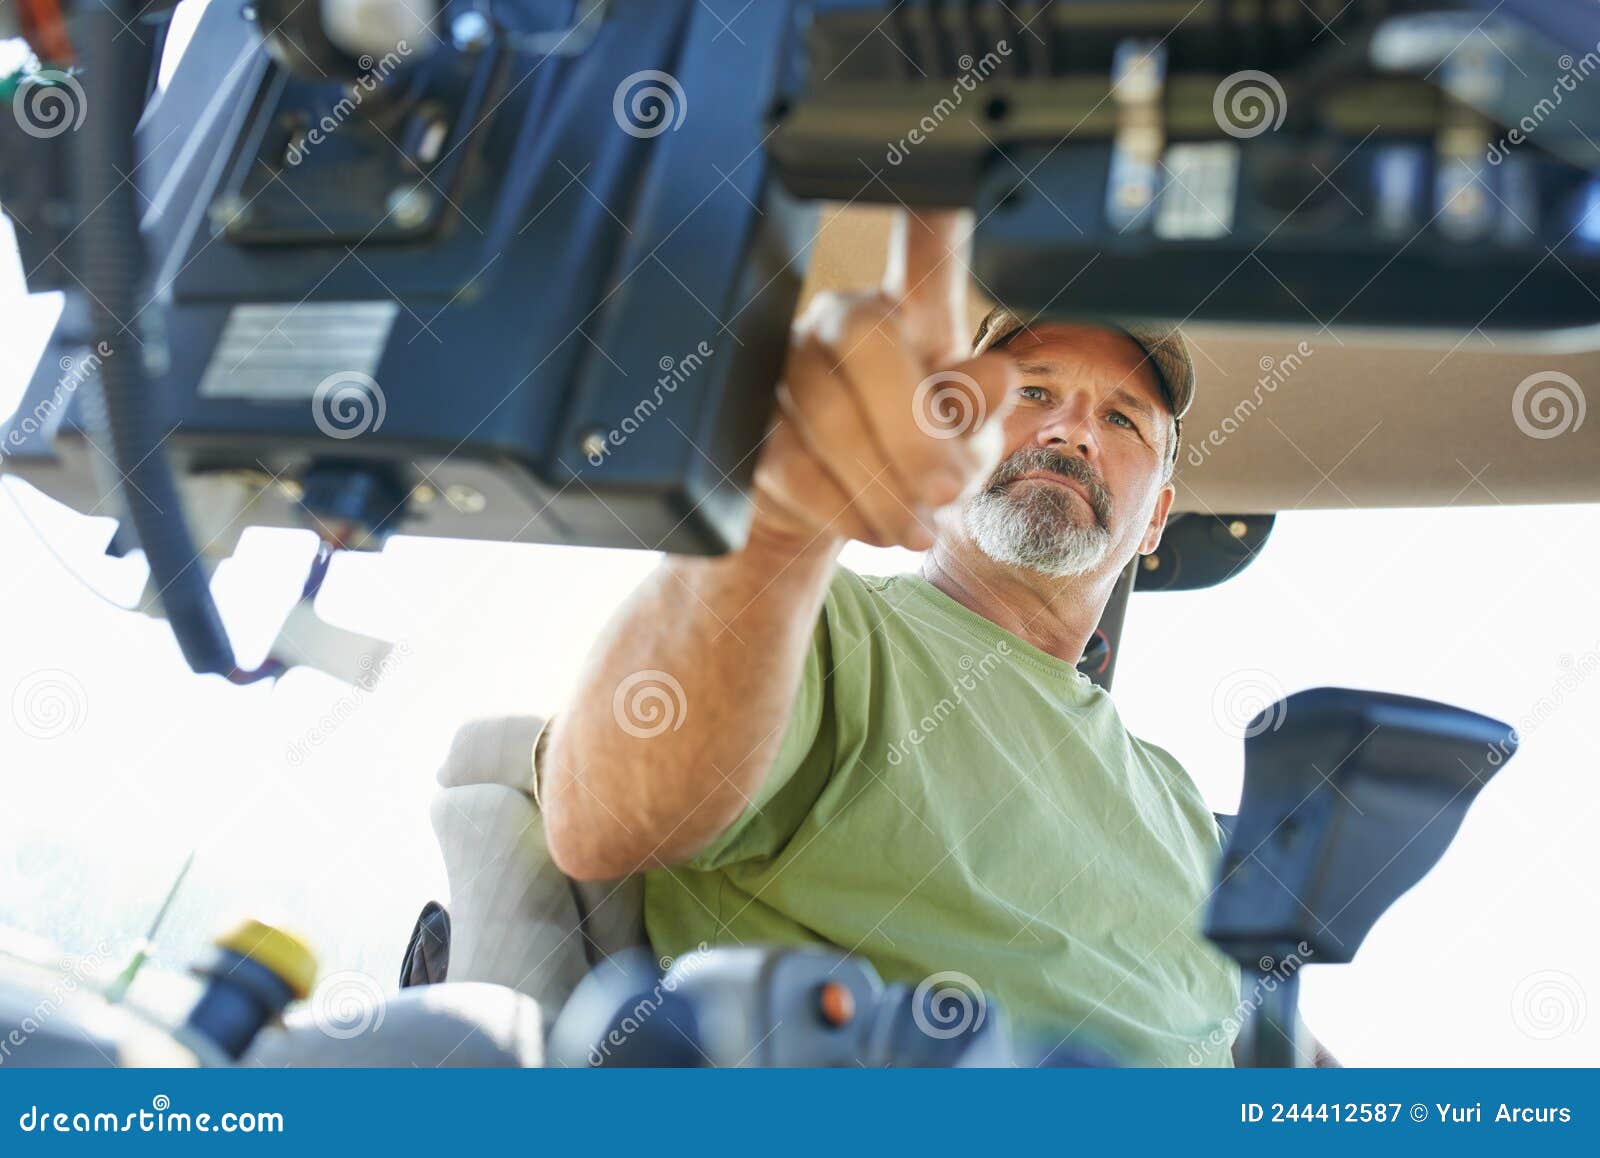 the beginning of the farming day. shot of a farmer working inside the cab of a modern tractor.